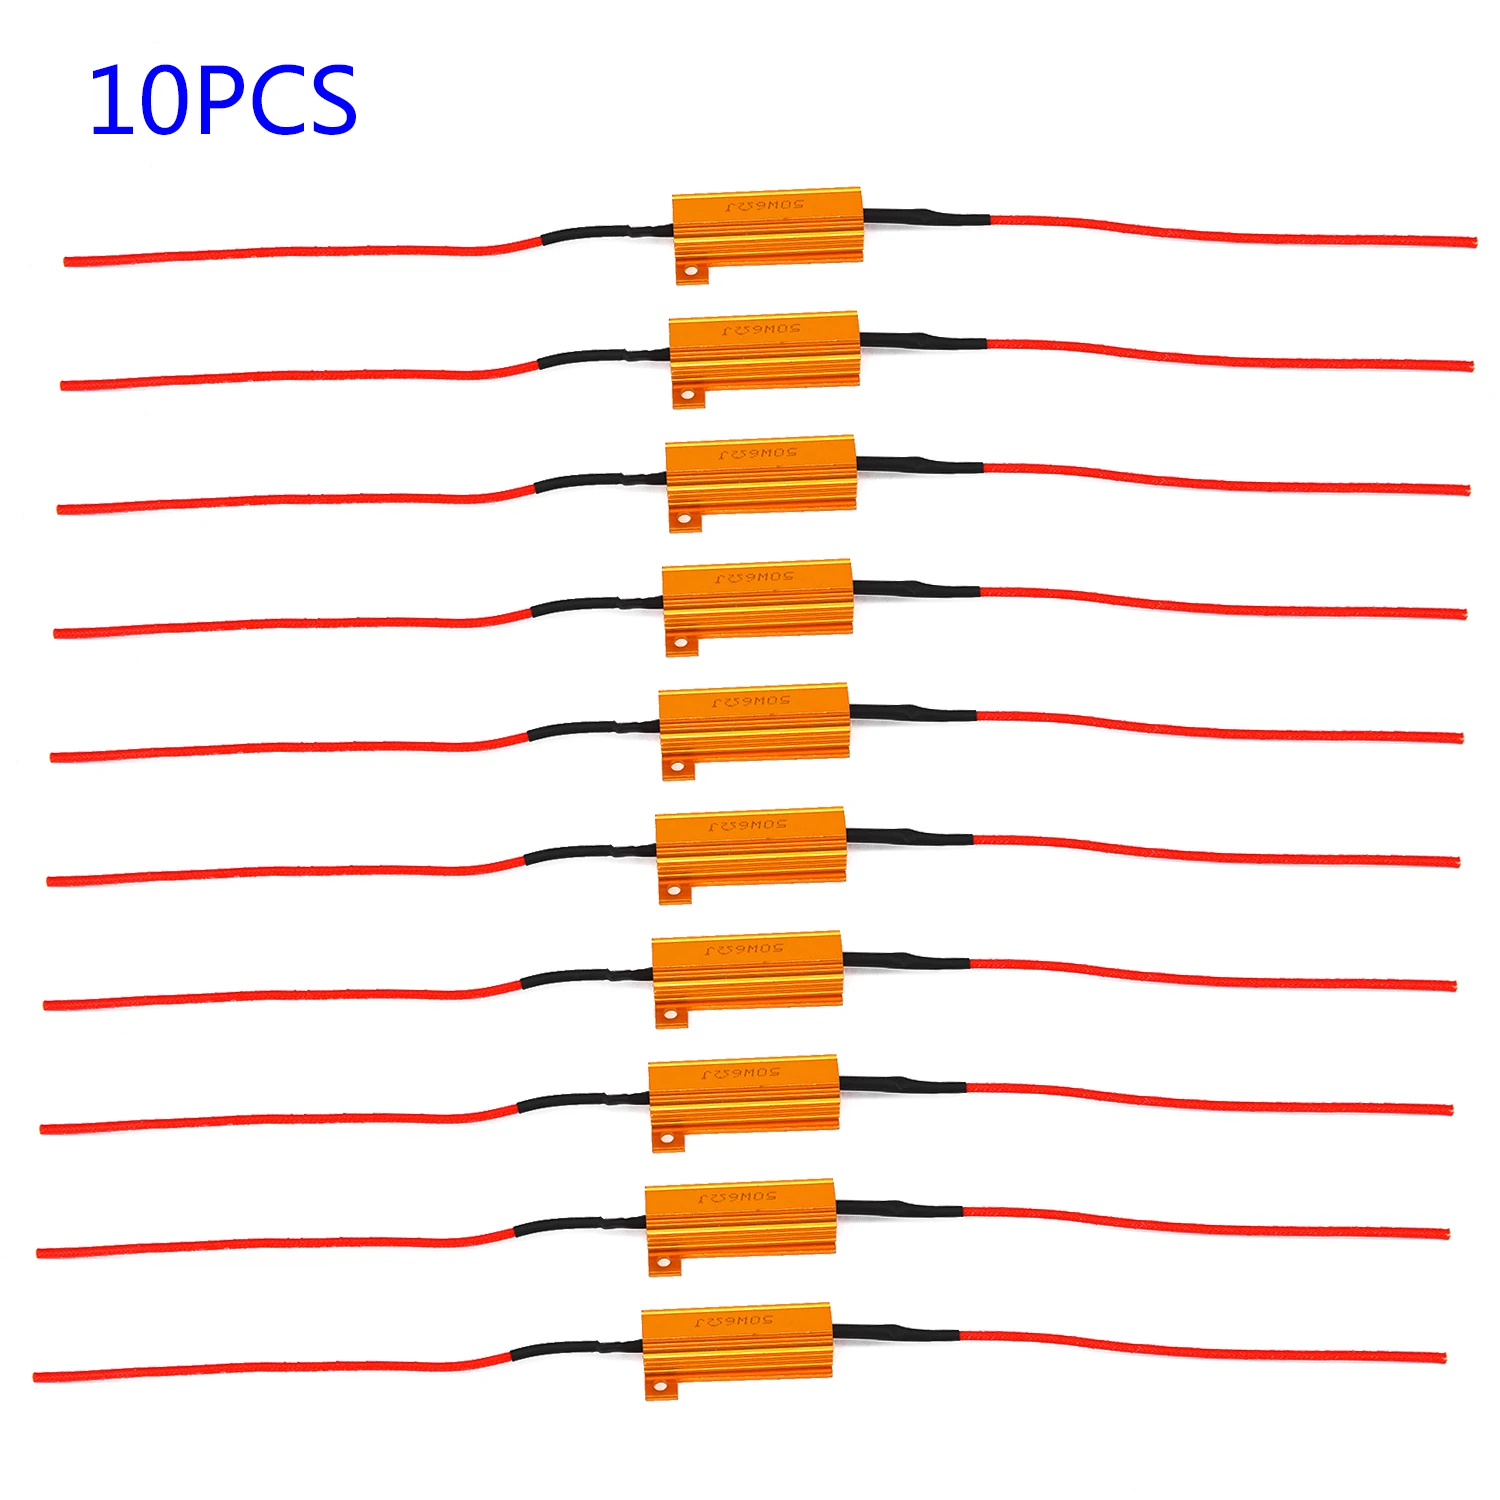 

10pcs PRO 10* 50 W 6 Ohm LED Lamp Decoder Brake Light Fault Canceller Resistor Decoder 50*15mm/1.97*0.59 Inches Car Accessories